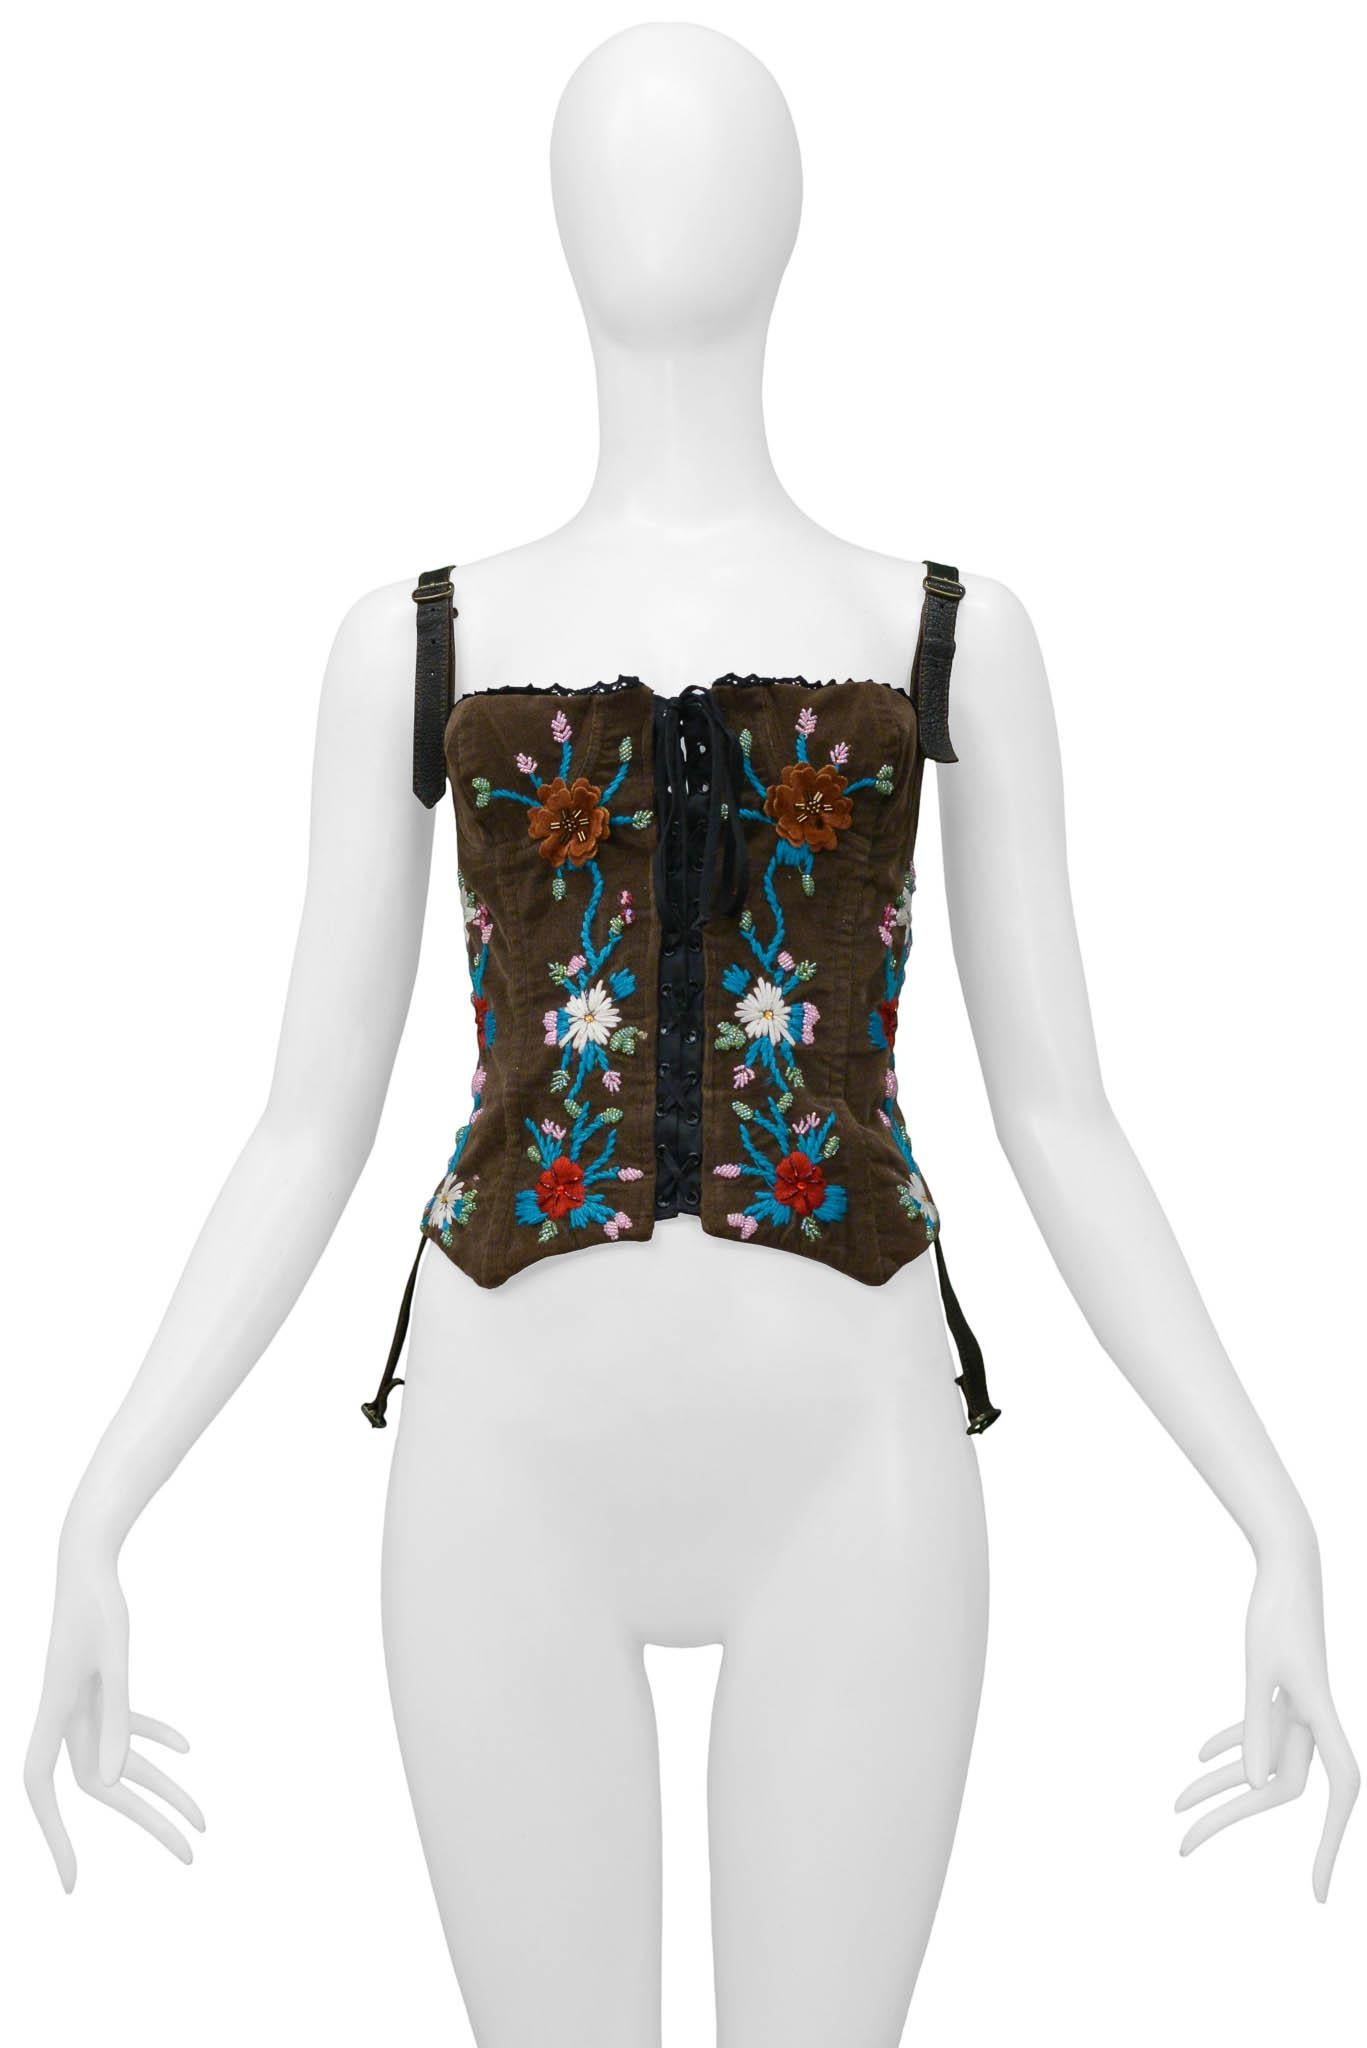 Resurrection Vintage is excited to offer a vintage Dolce & Gabbana brown corduroy corset top featuring floral embroidery and beading on the front, lace-up detailing on the front and back, and a hidden separating zipper at the side seam for easy